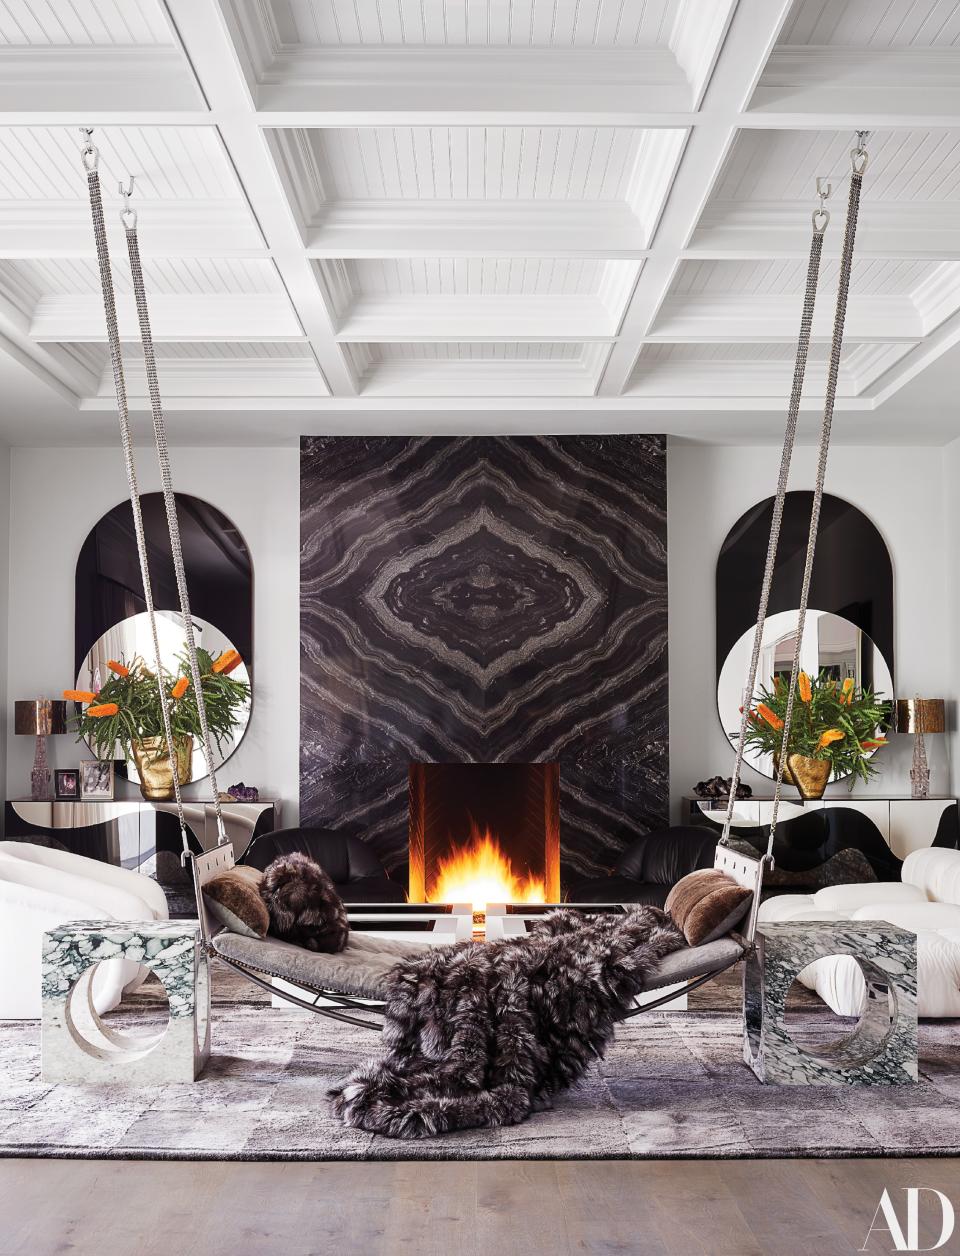 A Jim Zivic hammock from Ralph Pucci hangs in the family room. Bower mirrors from the Future Perfect; Tom Dixon brass vases; Kelly Wearstler marble side tables.